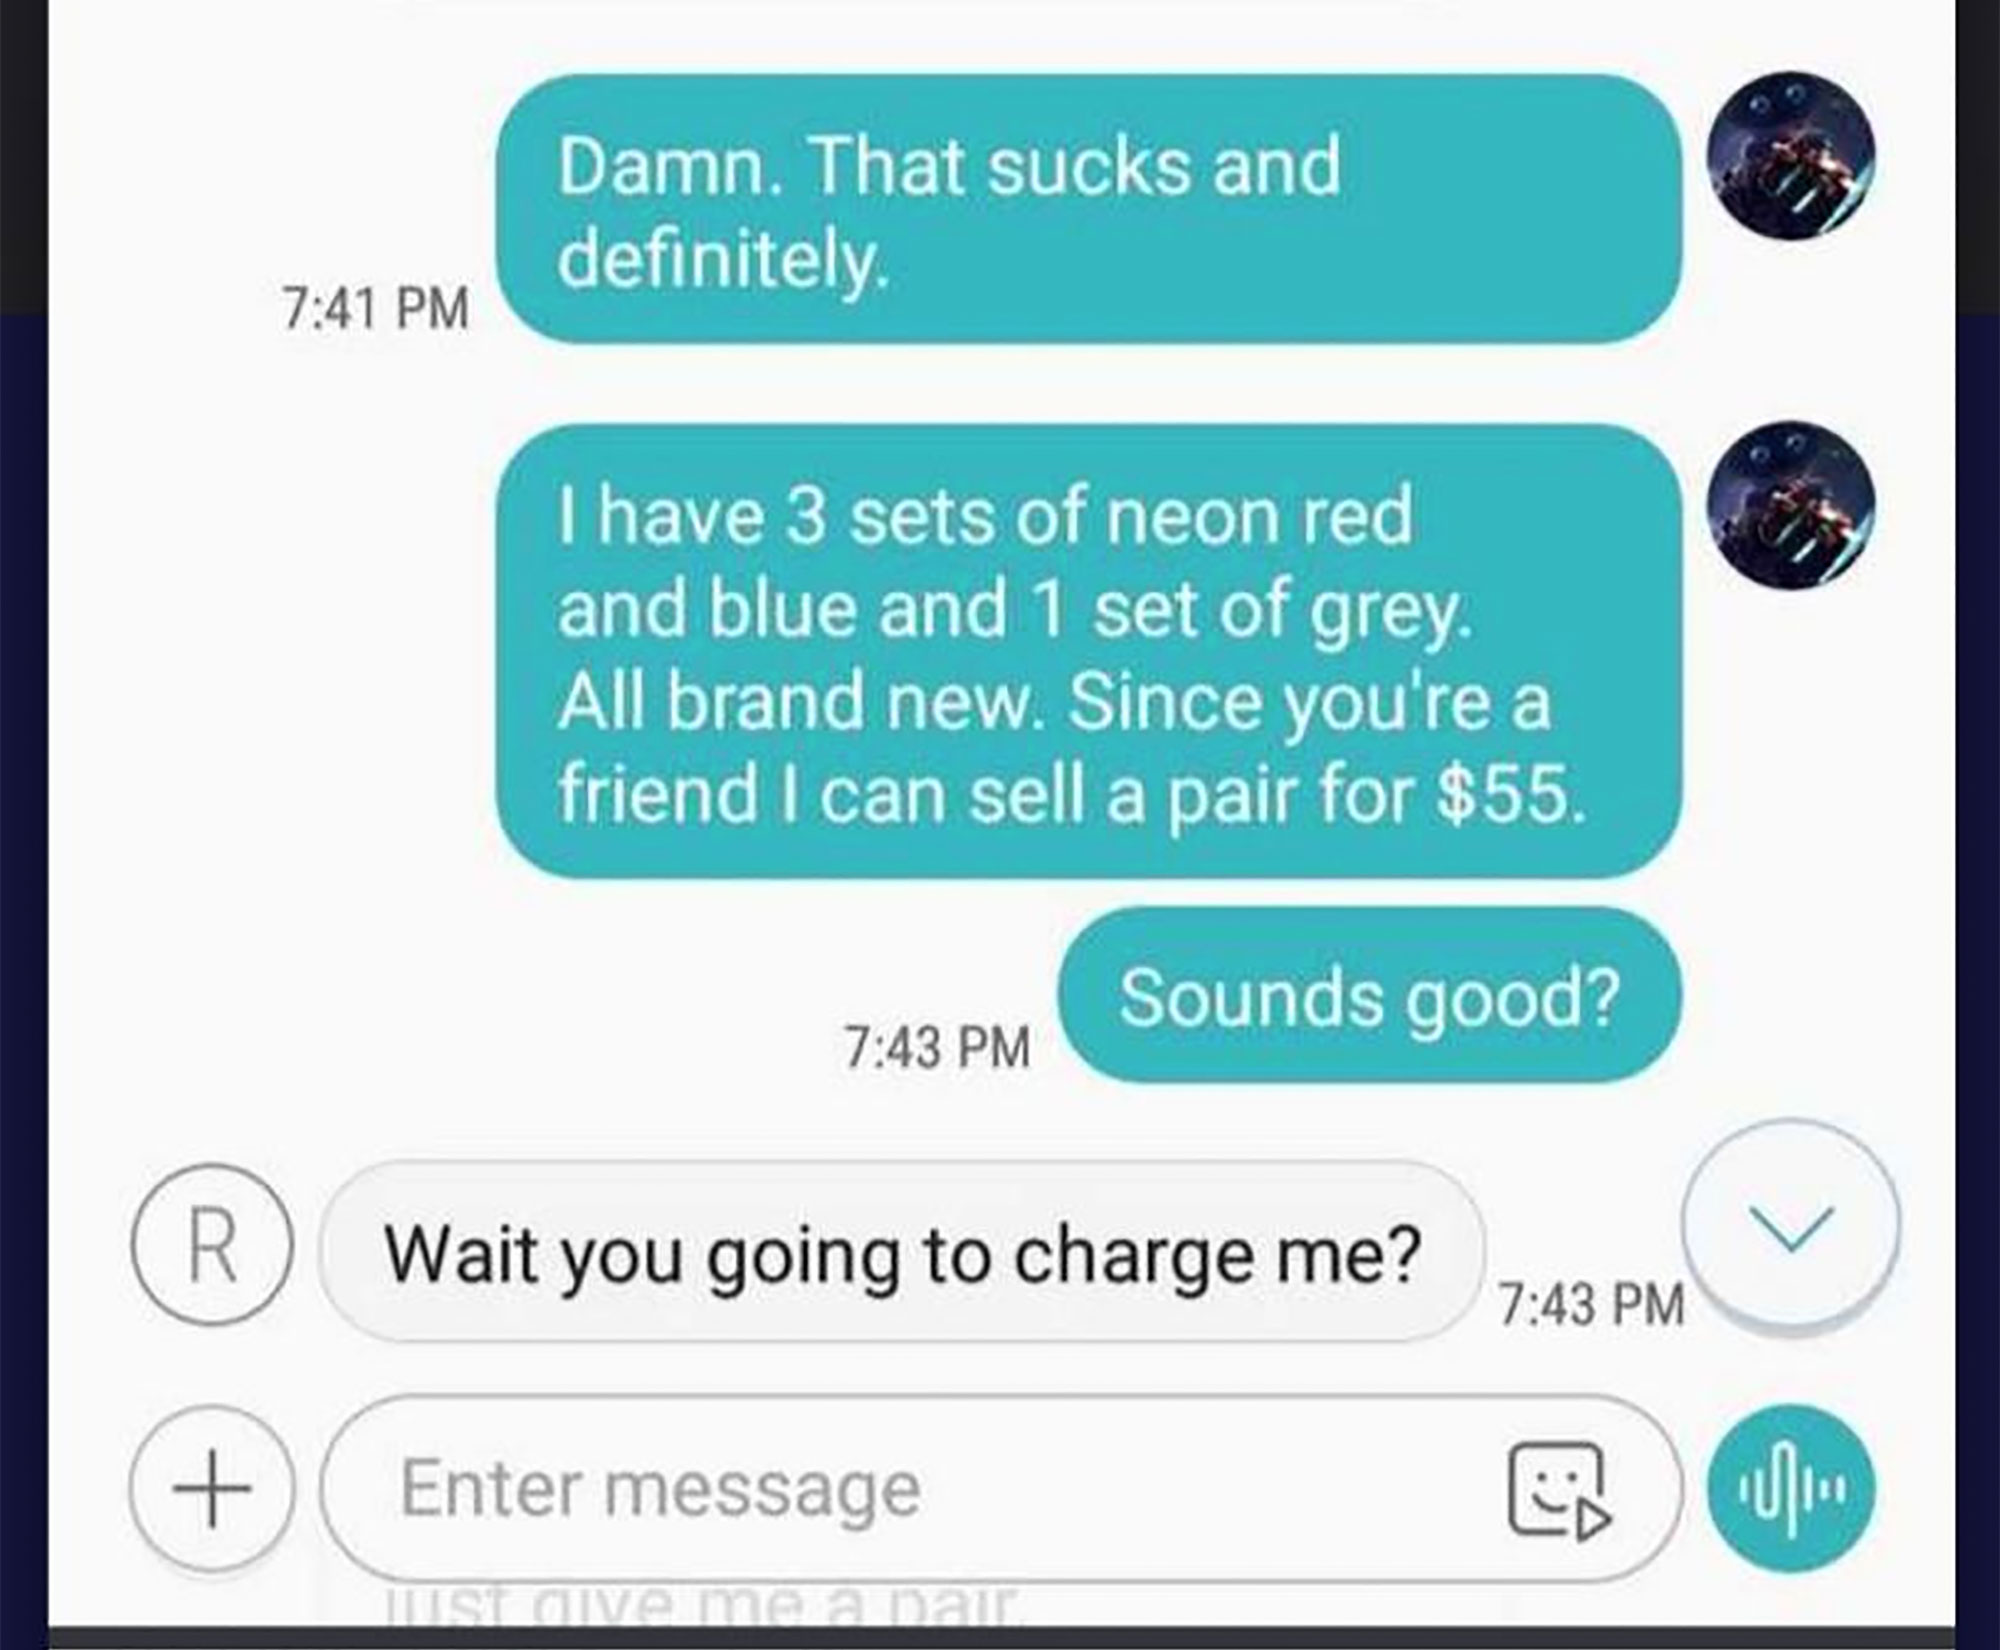 iphone error - Damn. That sucks and definitely I have 3 sets of neon red and blue and 1 set of grey. All brand new. Since you're a friend I can sell a pair for $55. Sounds good? Wait you going to charge me? Enter message Quivo maana